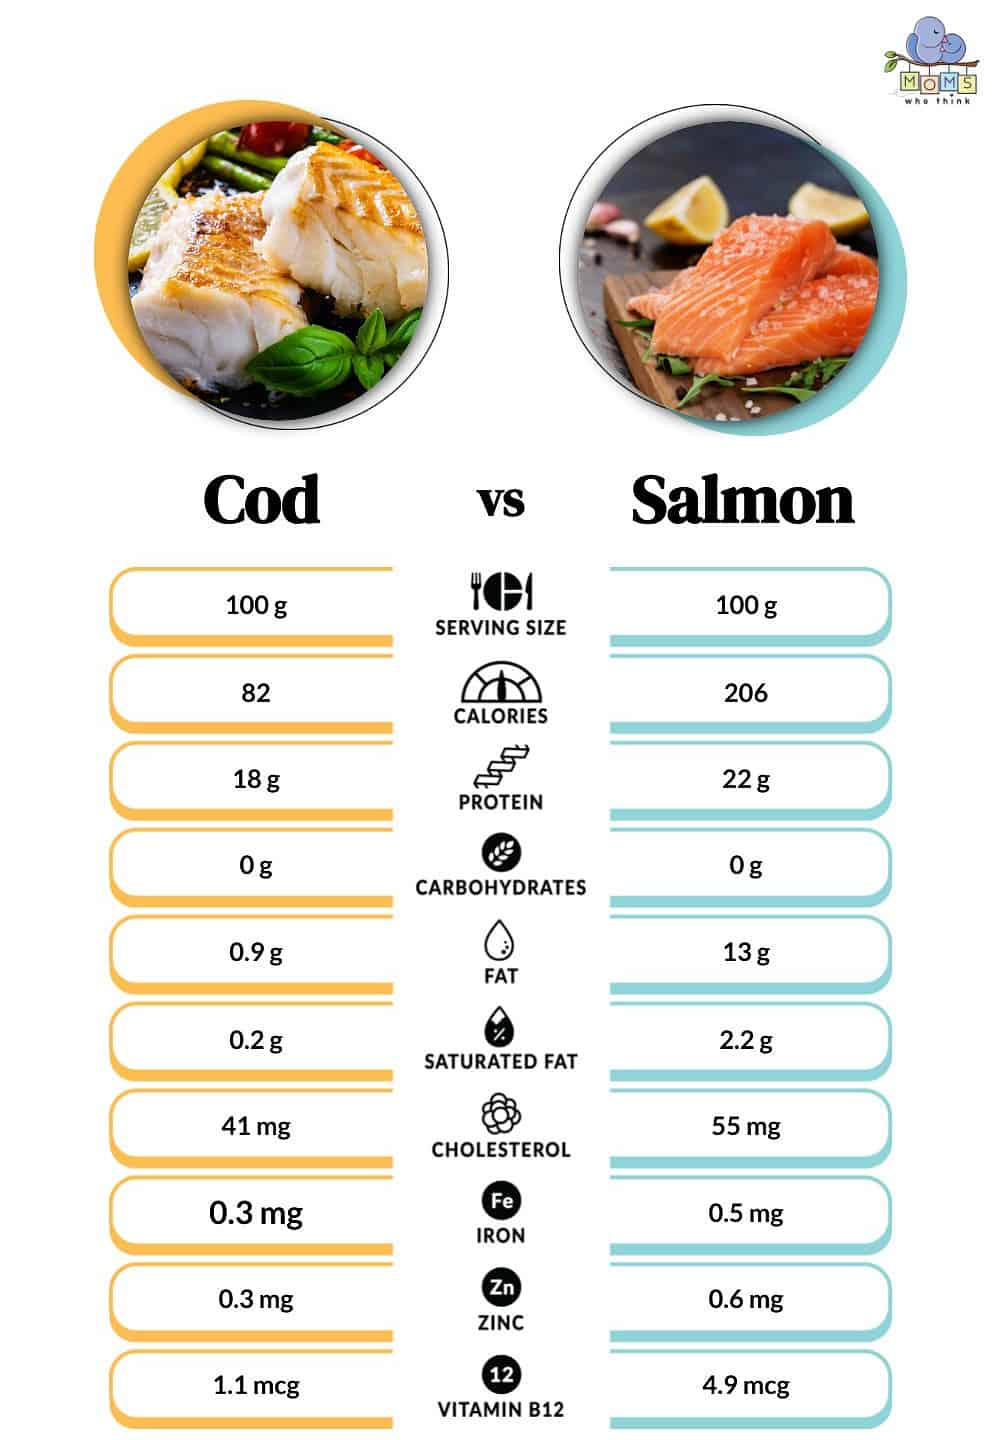 Cod vs Salmon Nutritional Facts